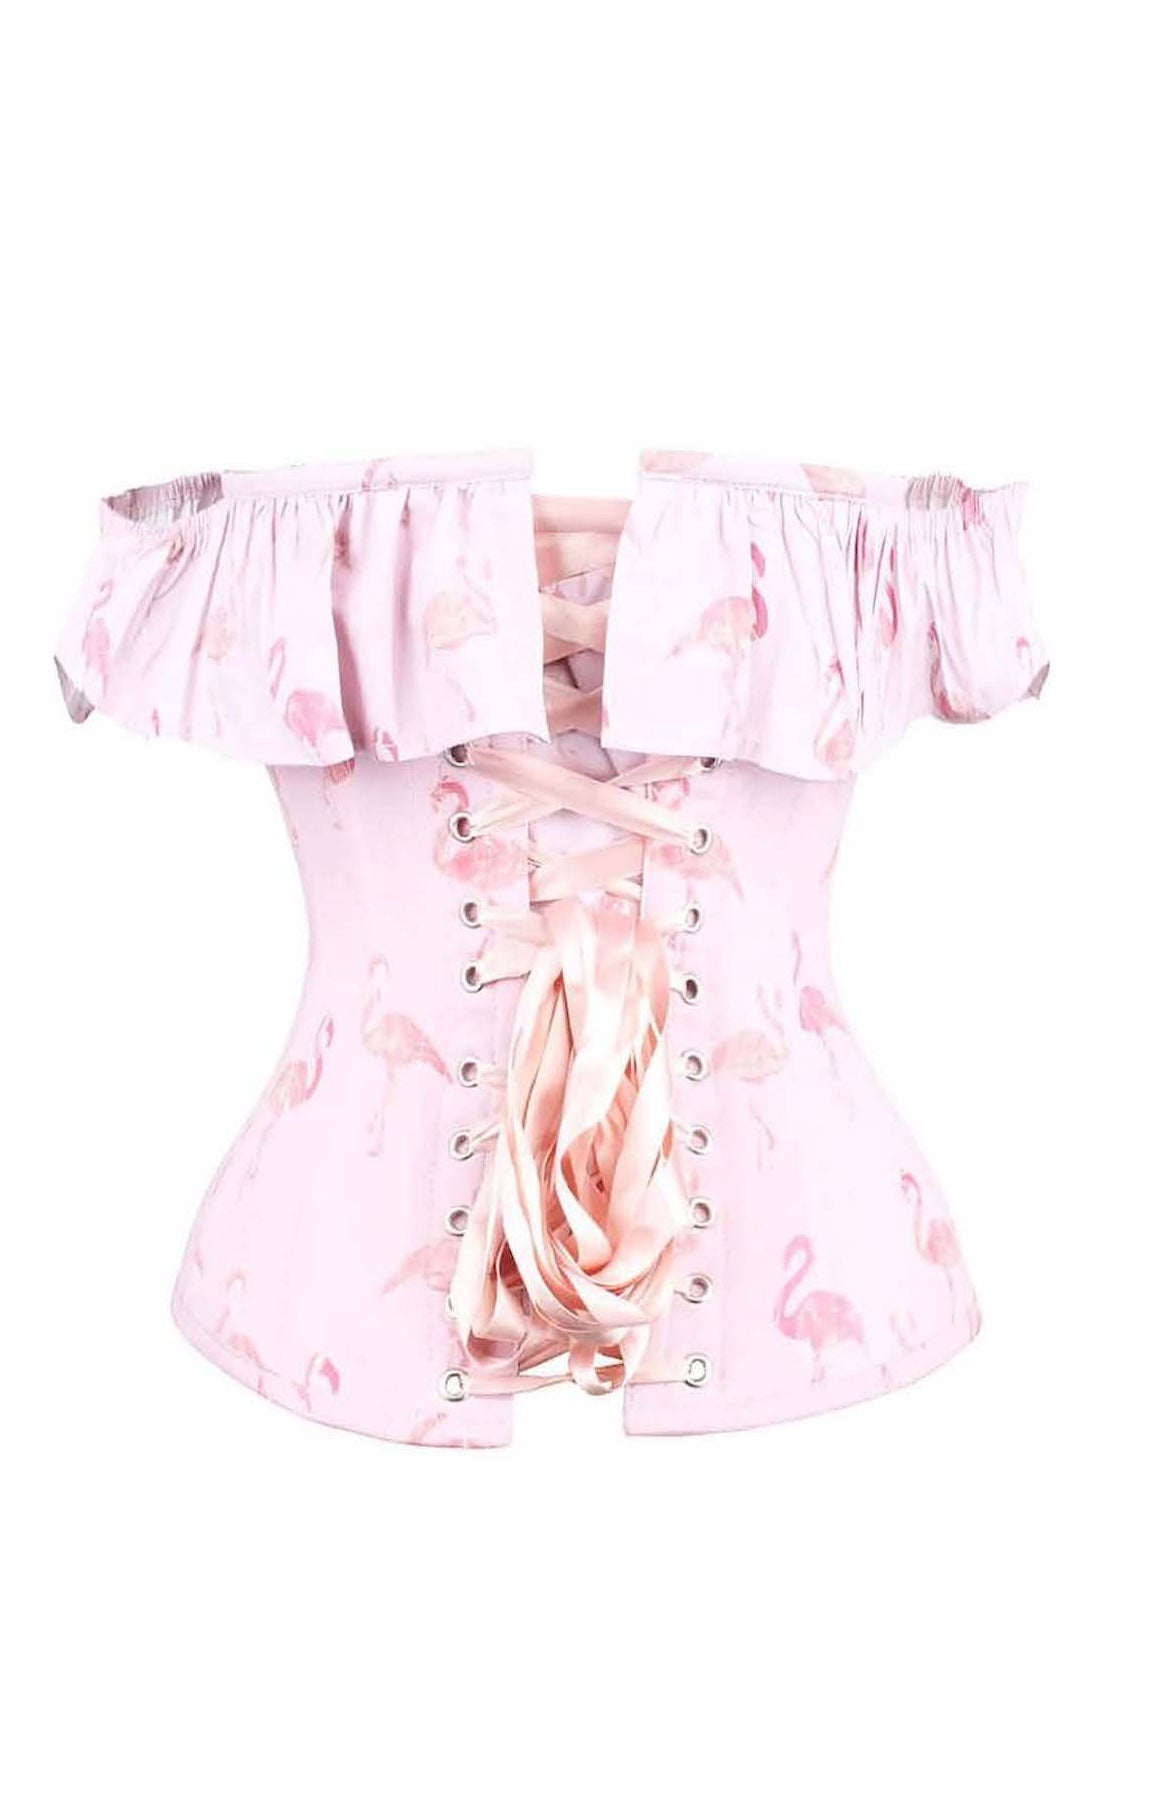 Corsets for sale in Flamingo, Florida